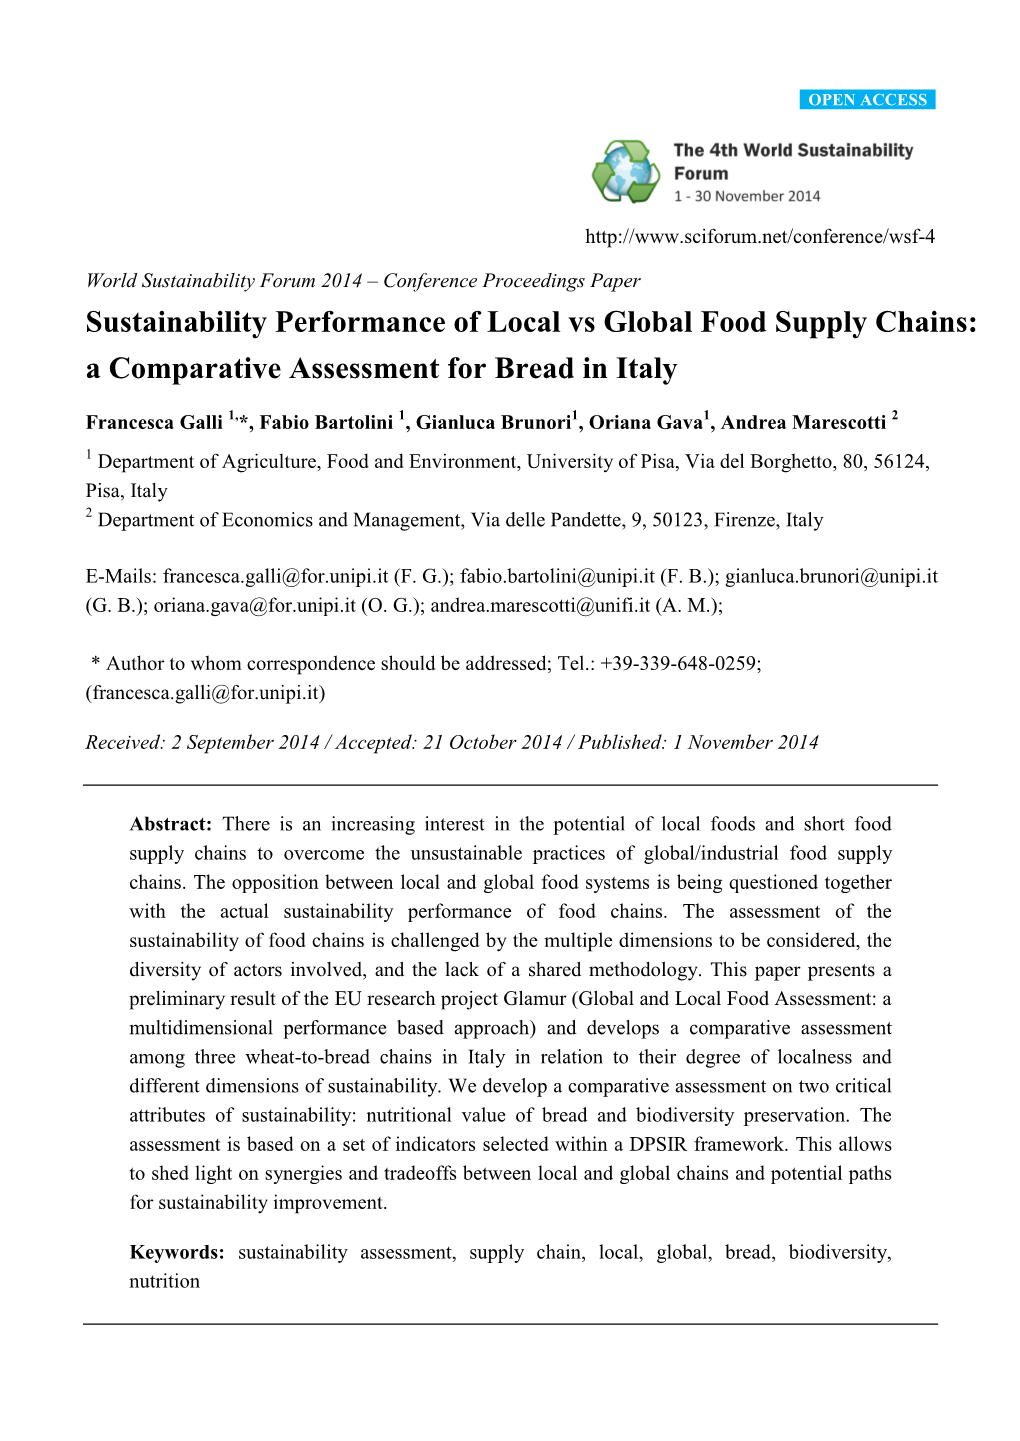 Sustainability Performance of Local Vs Global Food Supply Chains: the Case of Bread Chains in Italy